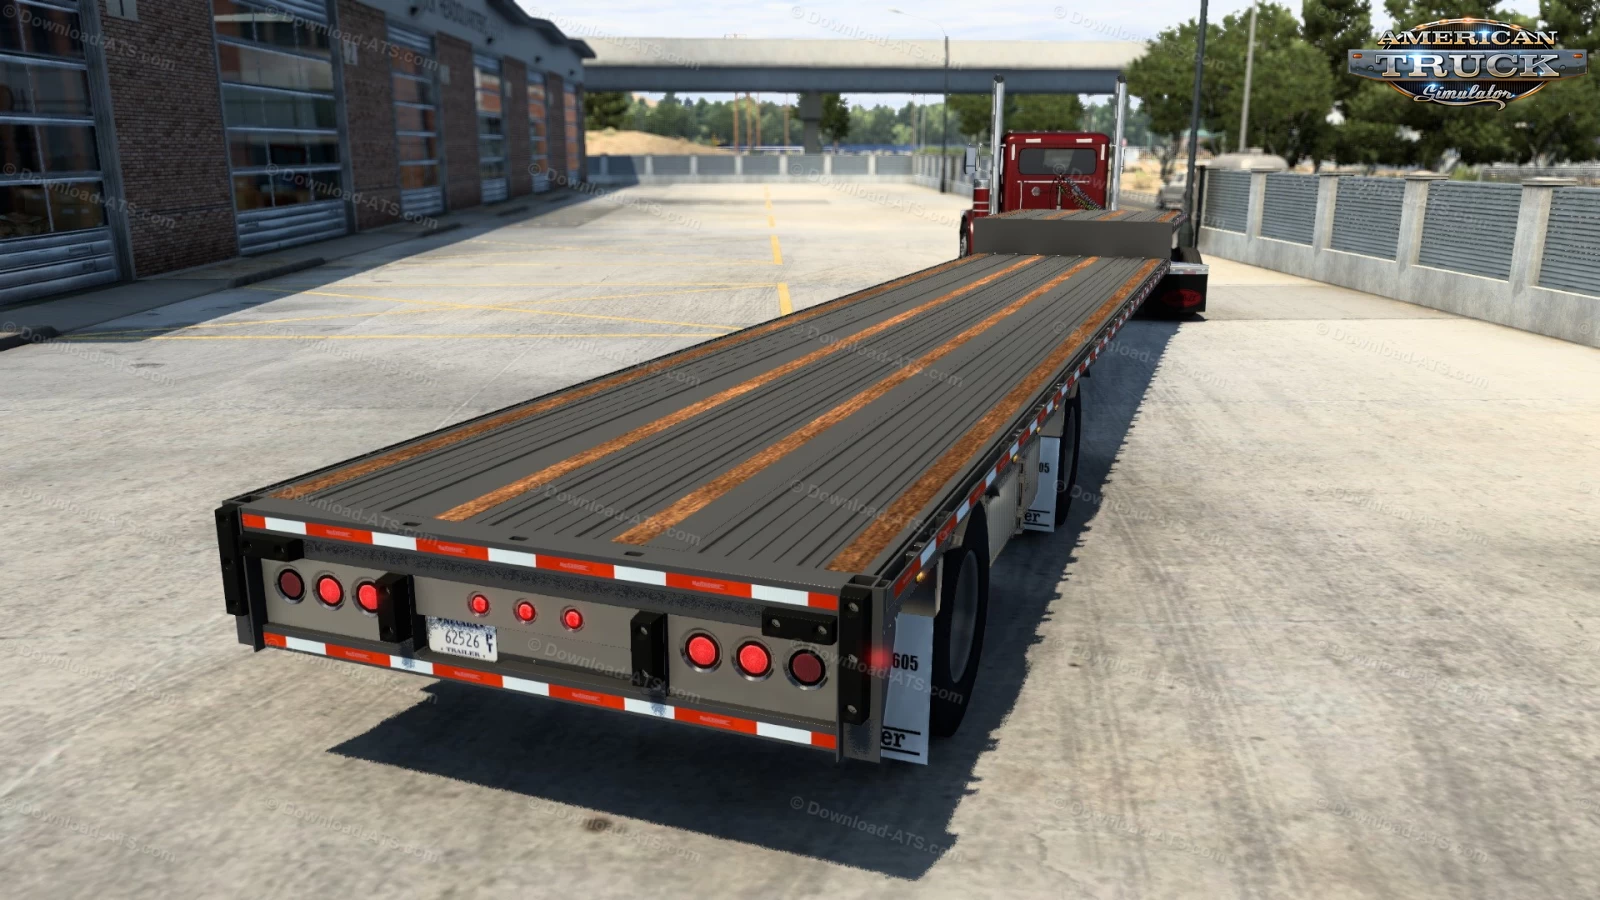 Reitnouer Dropmiser Ownable Trailer v1.1 (1.41.x) for ATS